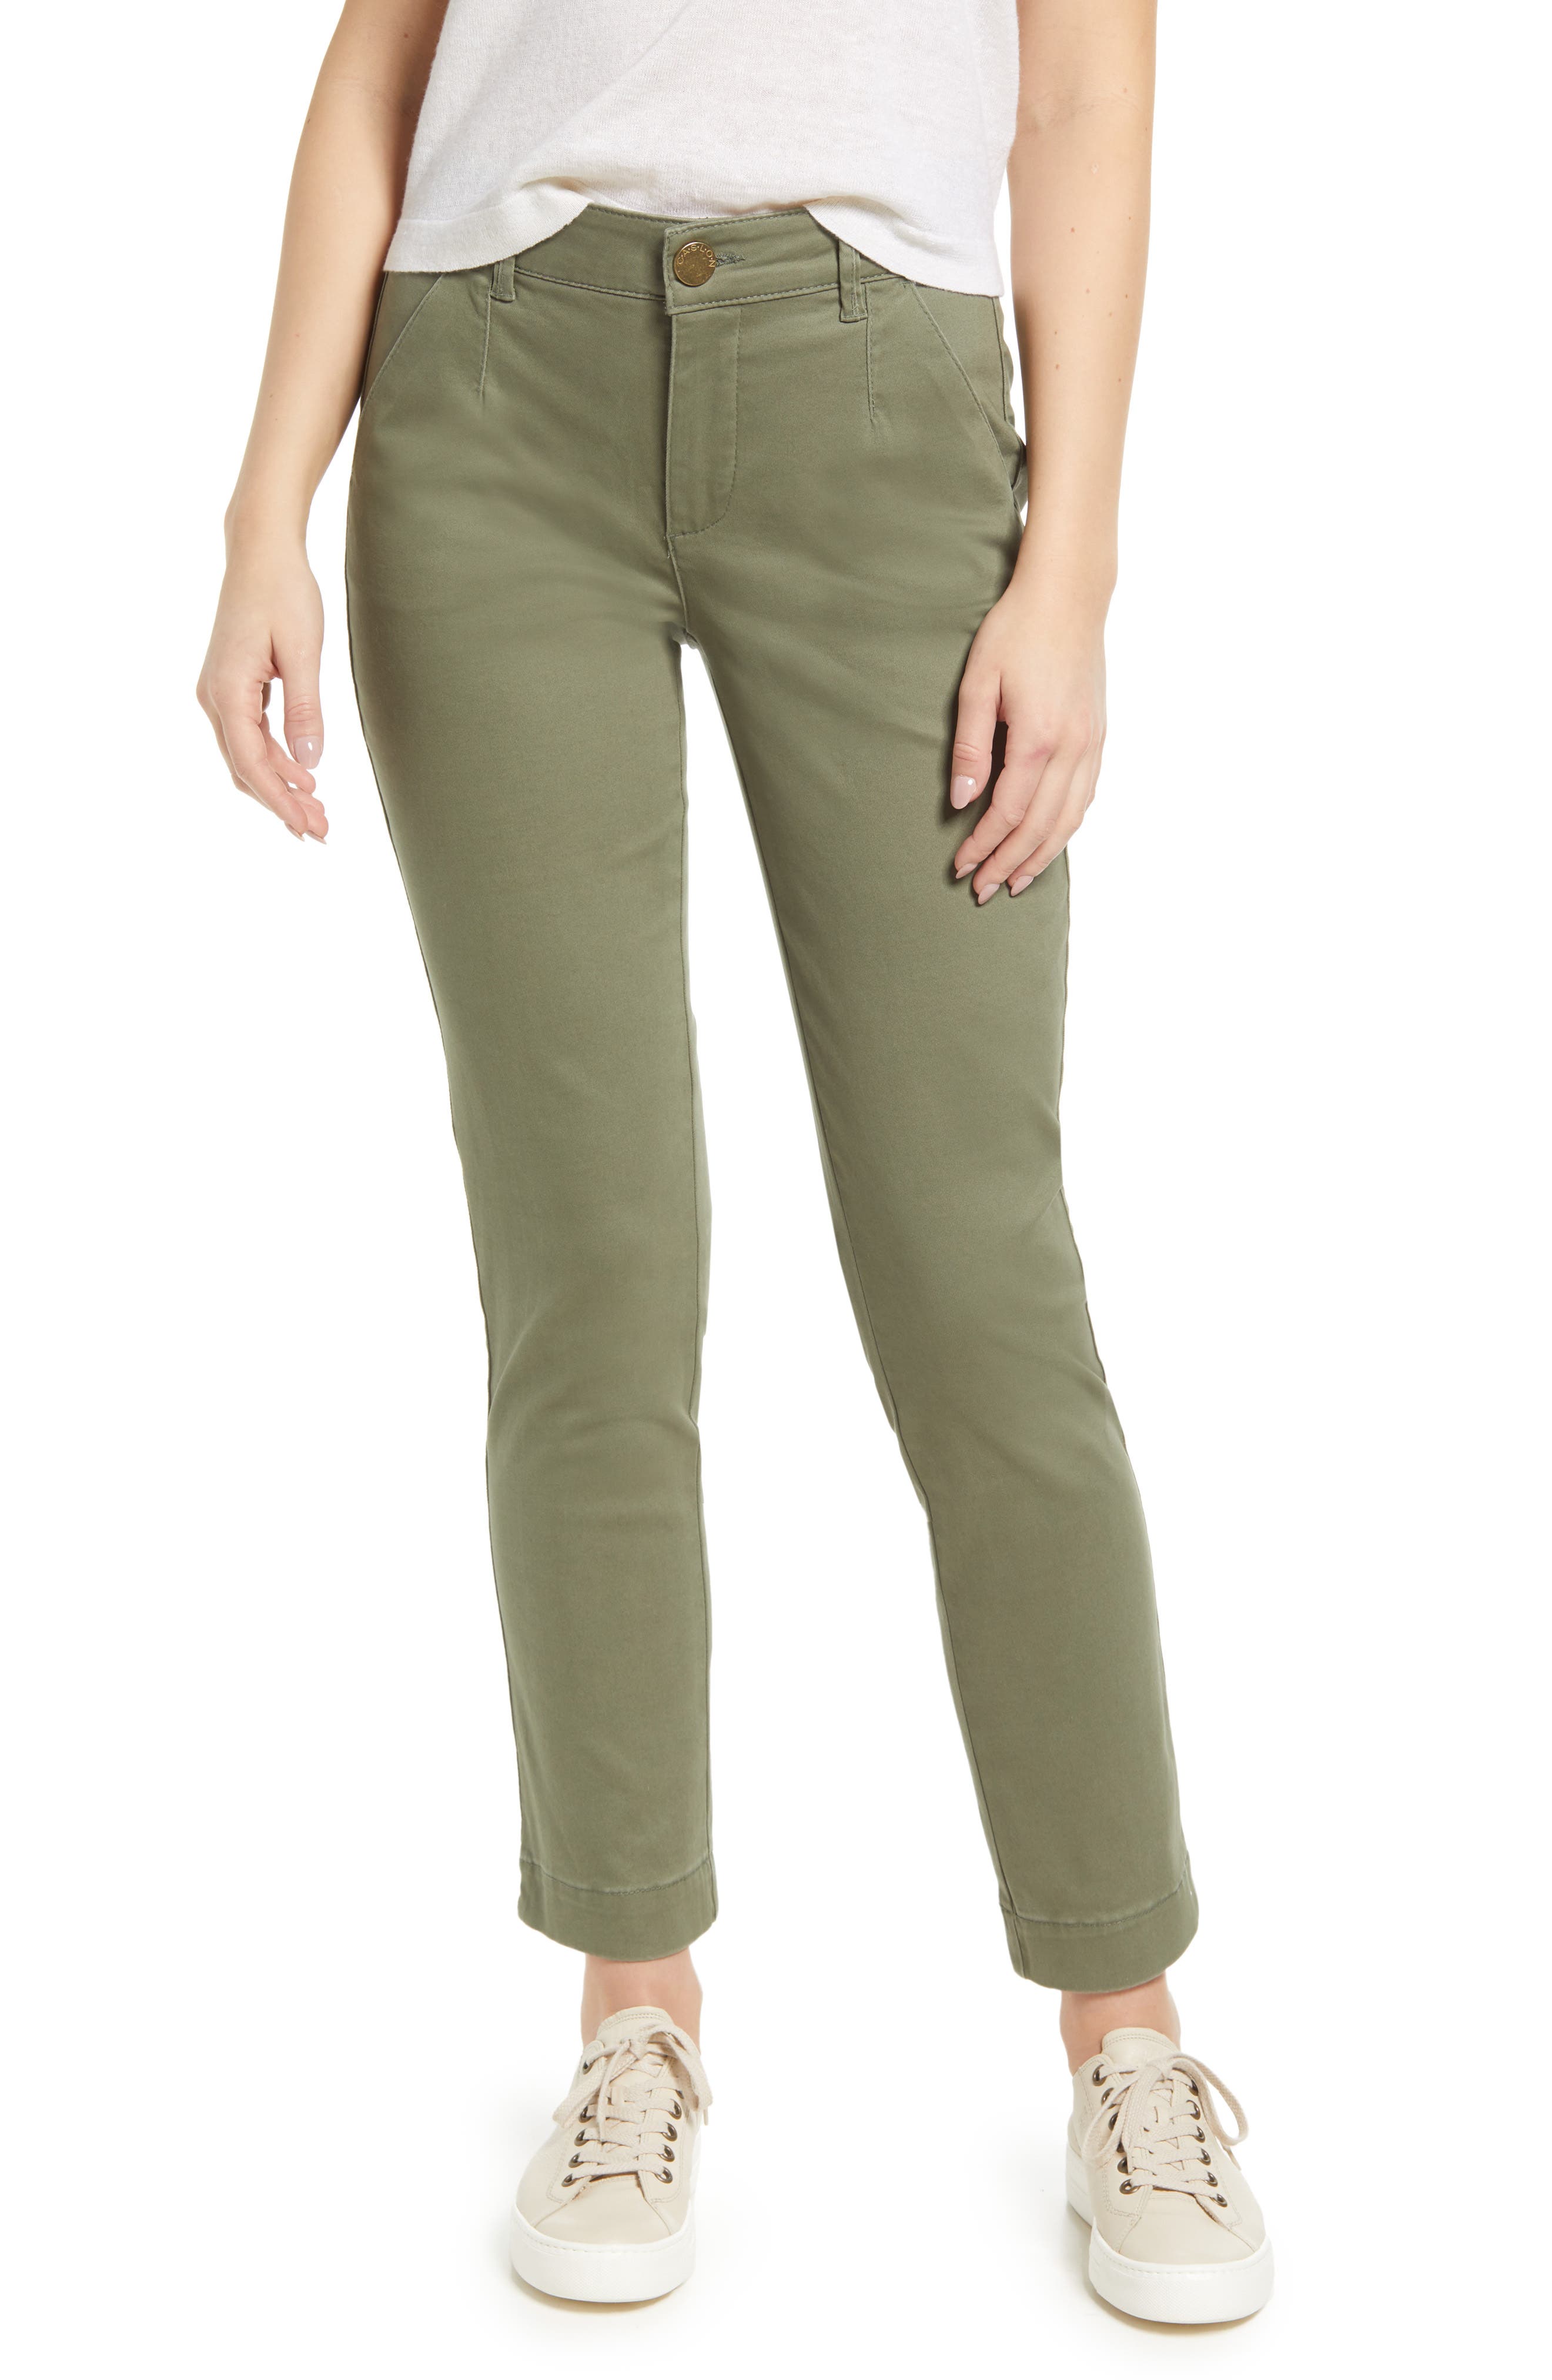 Miss Selfridge Miss Selfridg Petite Side Pocket Cargo Pants in Natural Slacks and Chinos Cargo trousers Womens Clothing Trousers 